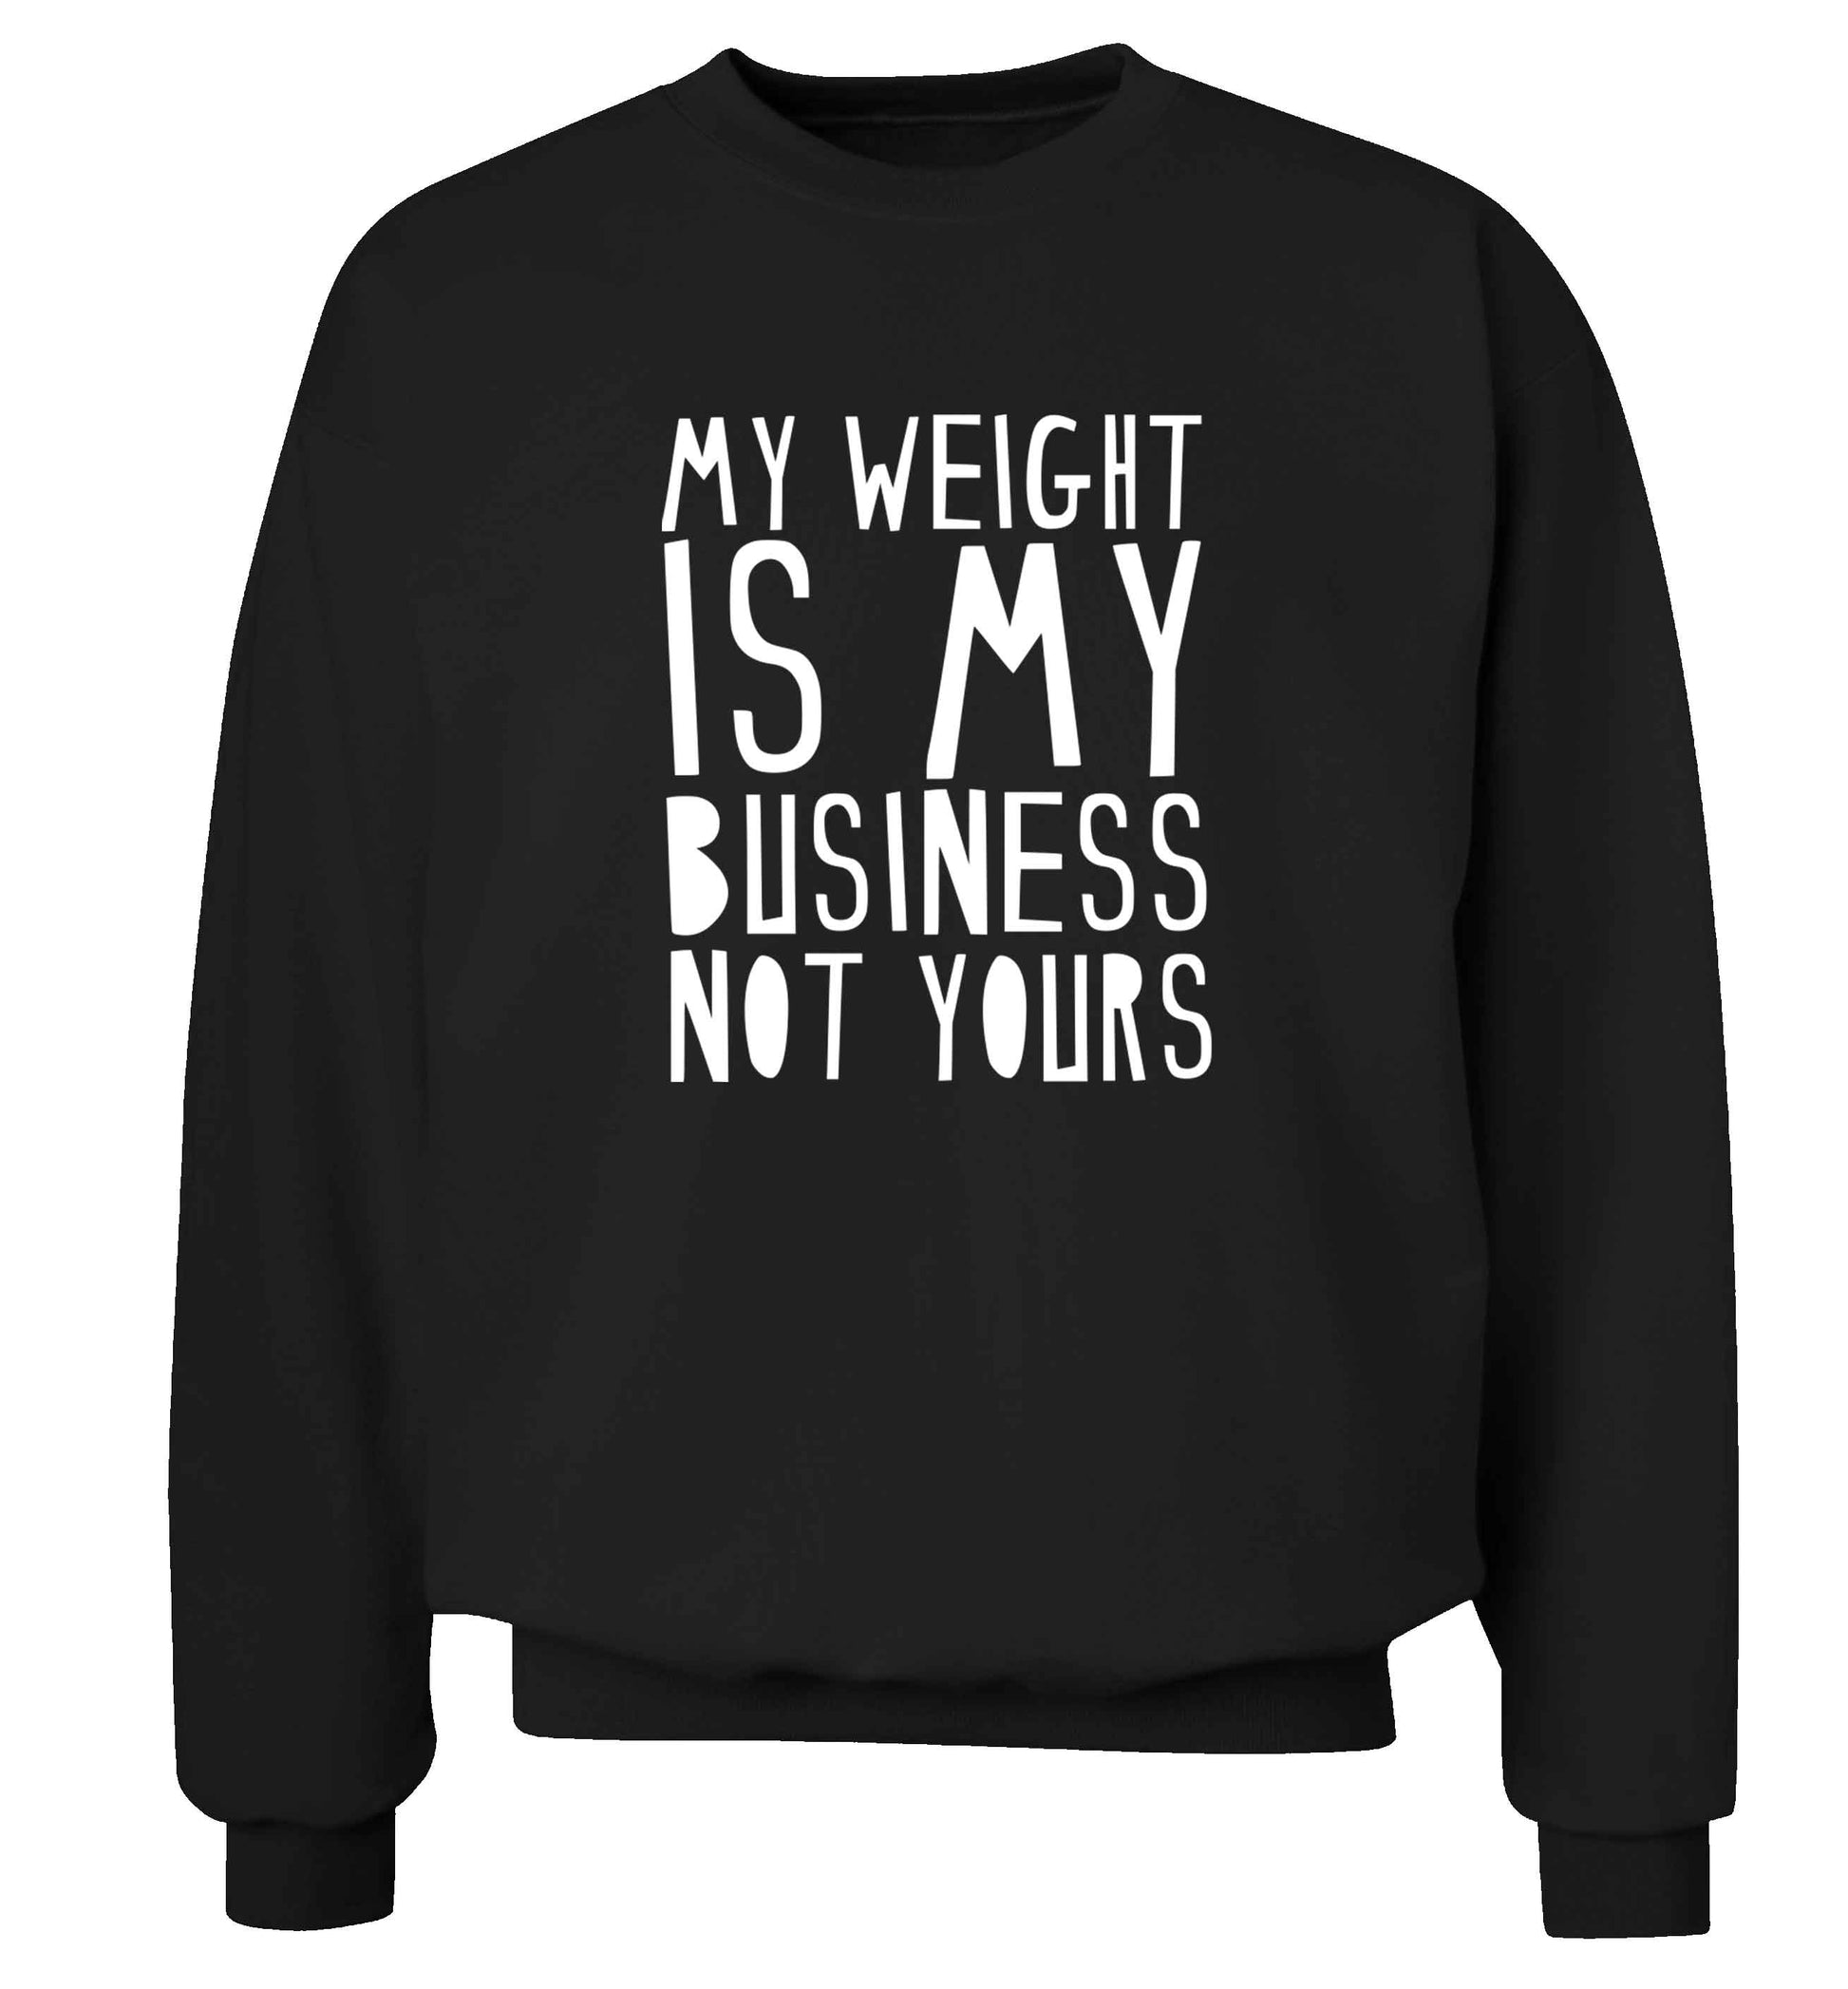 My weight is my business not yours adult's unisex black sweater 2XL